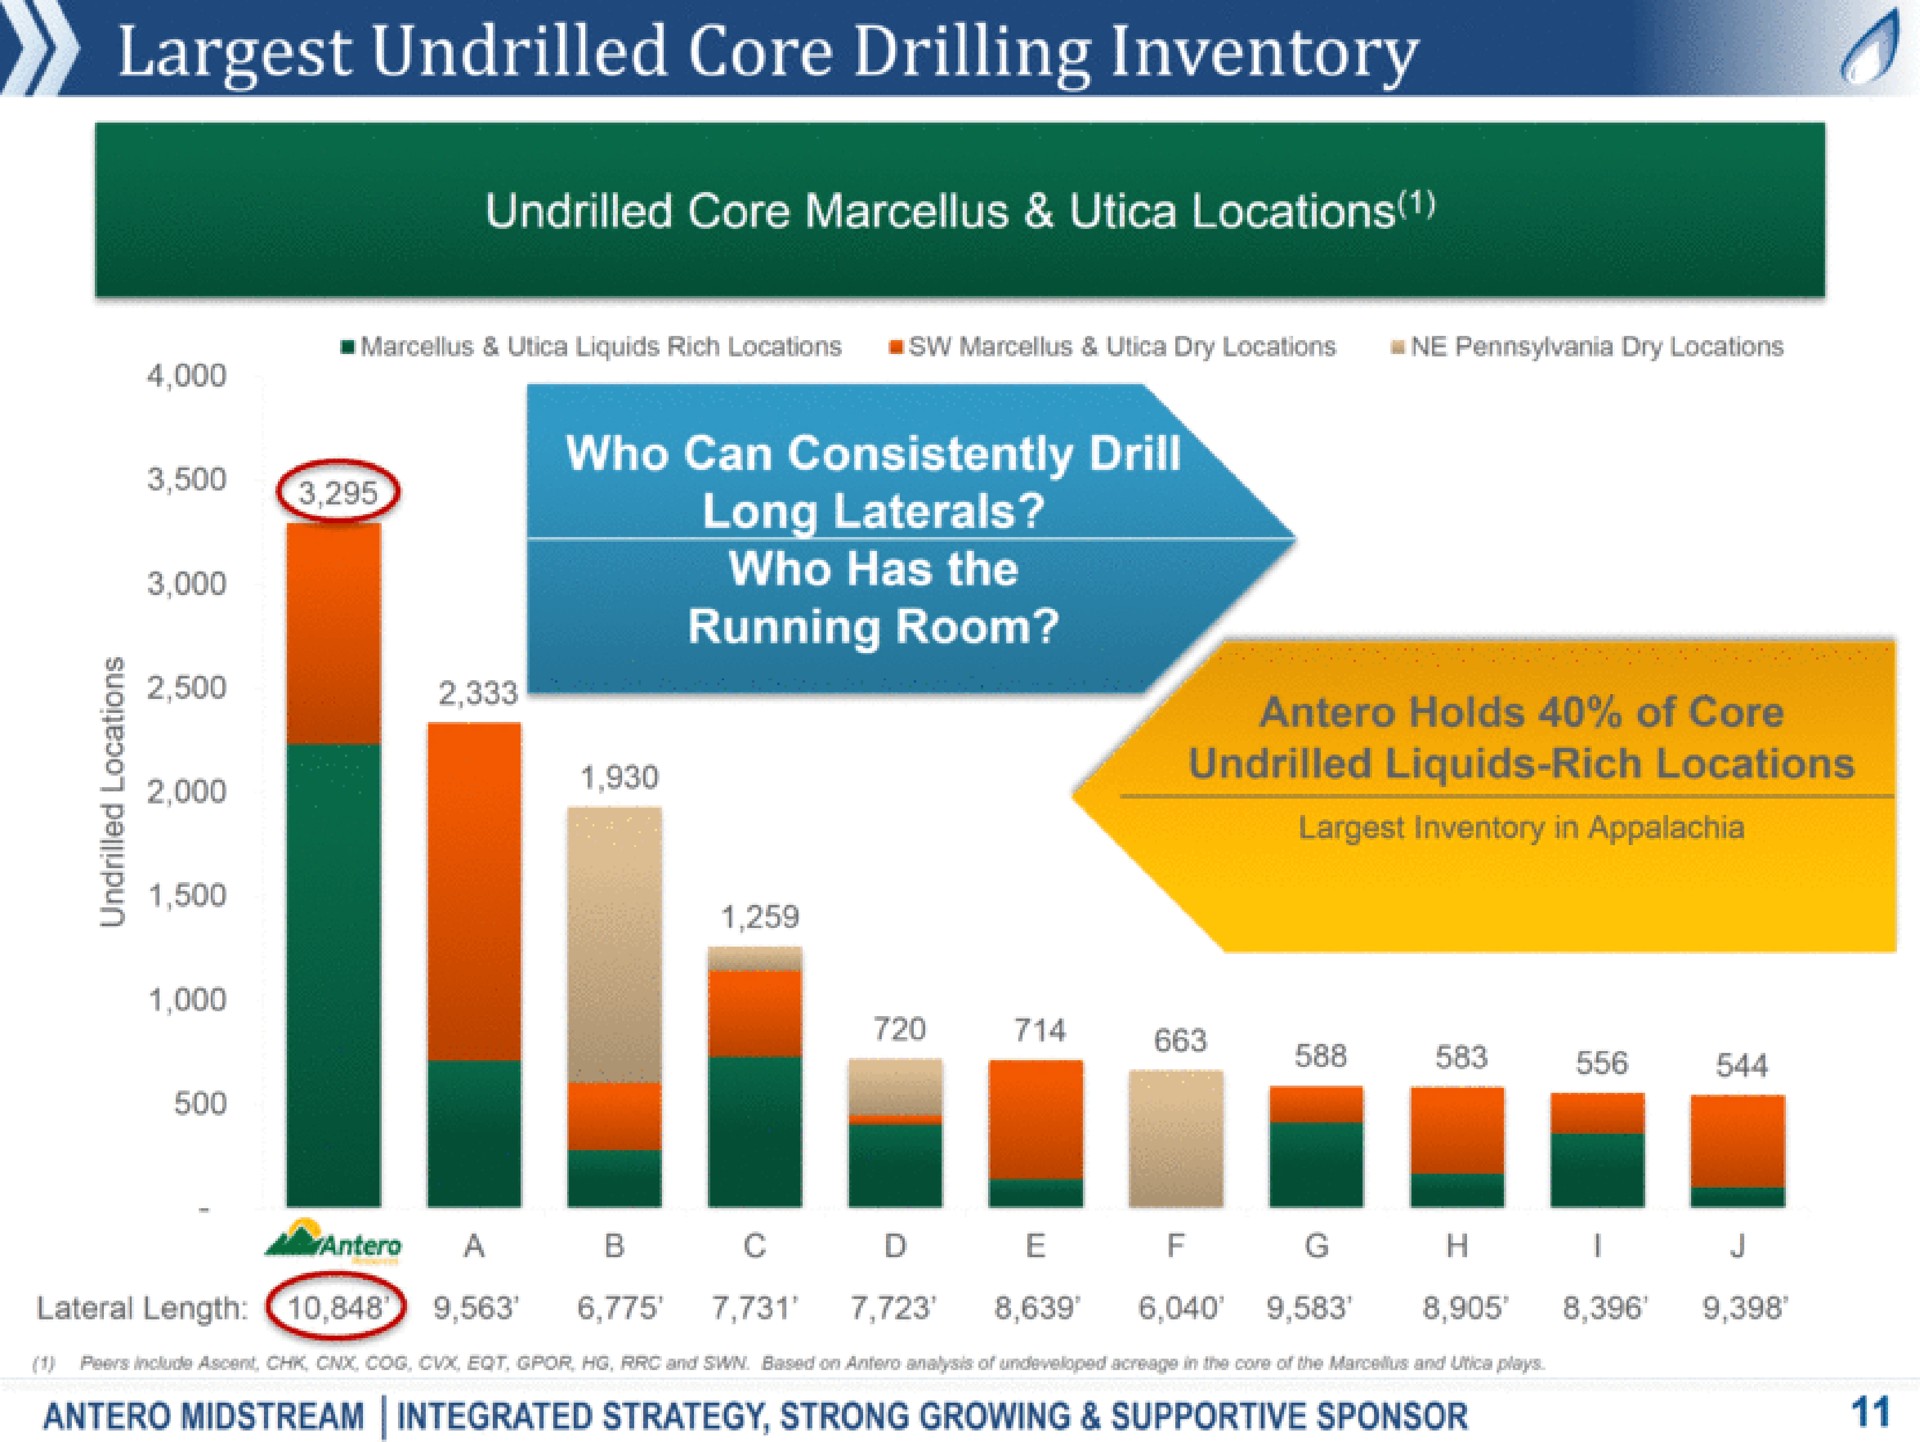 undrilled core drilling inventory undrilled core locations liquids rich locations dry locations a dry locations who can consistently drill long laterals who has the running room a aas undrilled liquids rich locations in inventory on i a lateral length ascot cog and saw based on anes of undeveloped i of bag nuts plays midstream integrated strategy strong growing supportive sponsor | Antero Midstream Partners